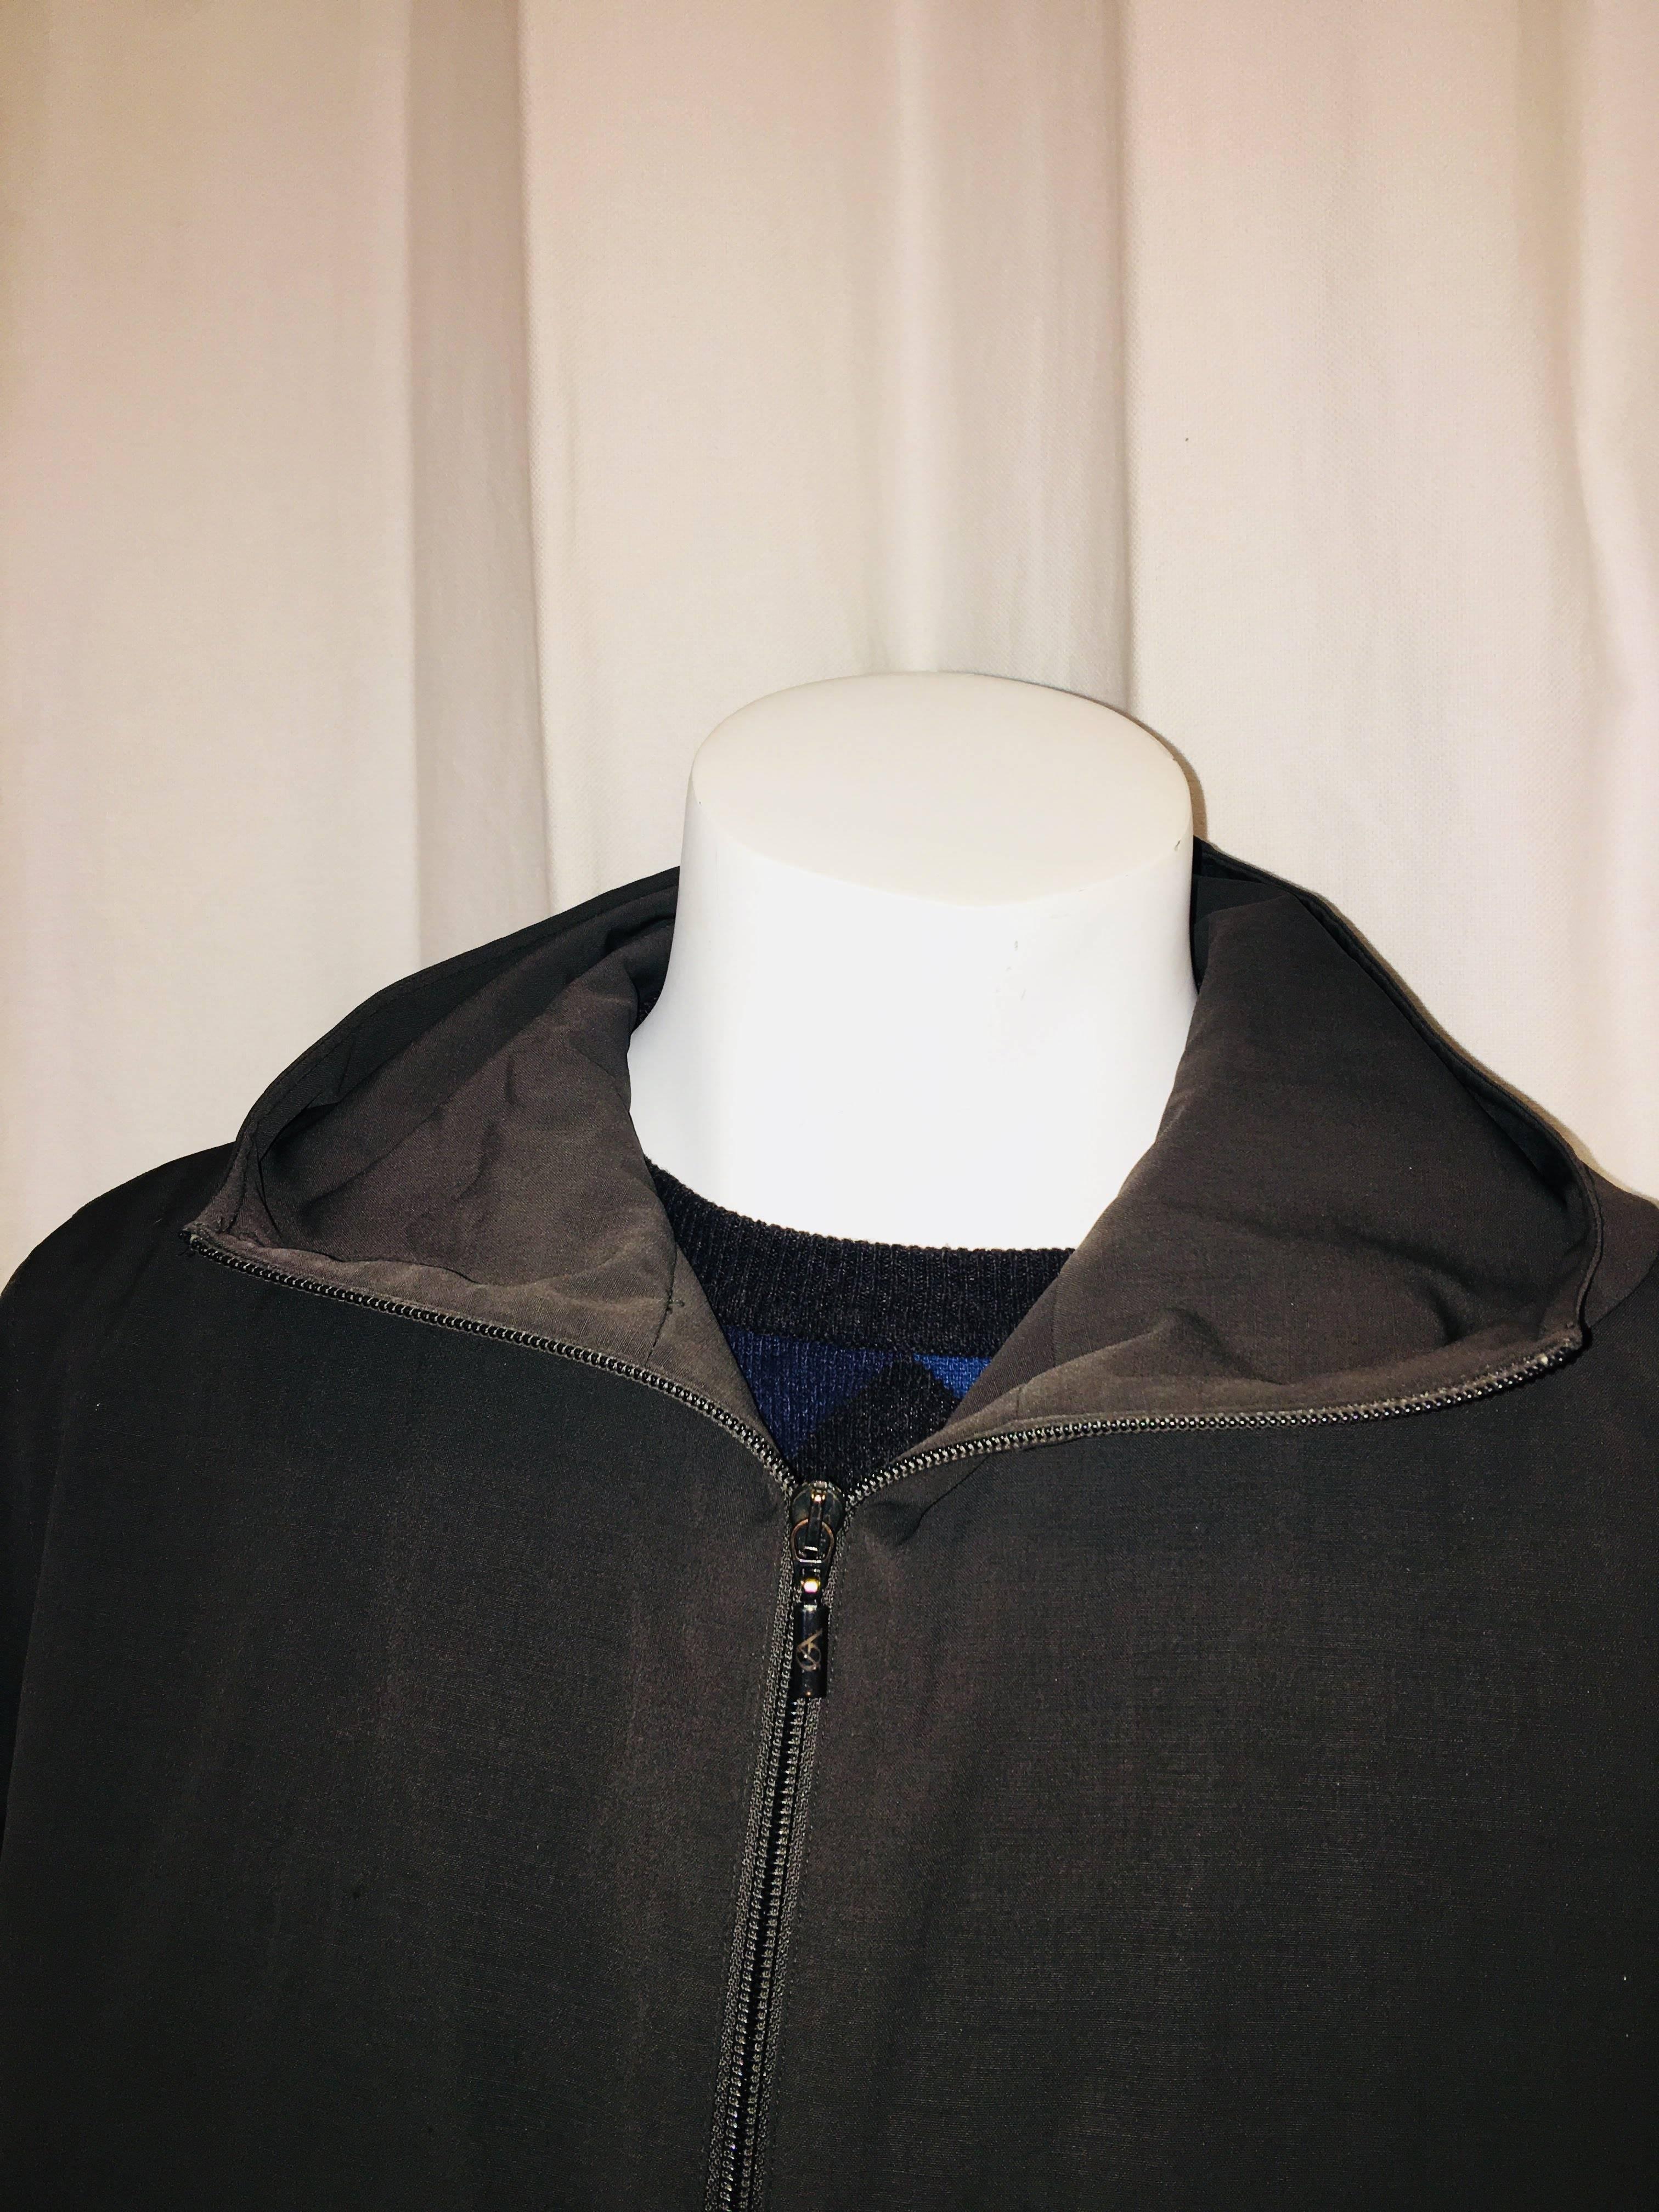 Giorgio Armani Short Hooded Rain Jacket with Zip Front and Inside Pocket